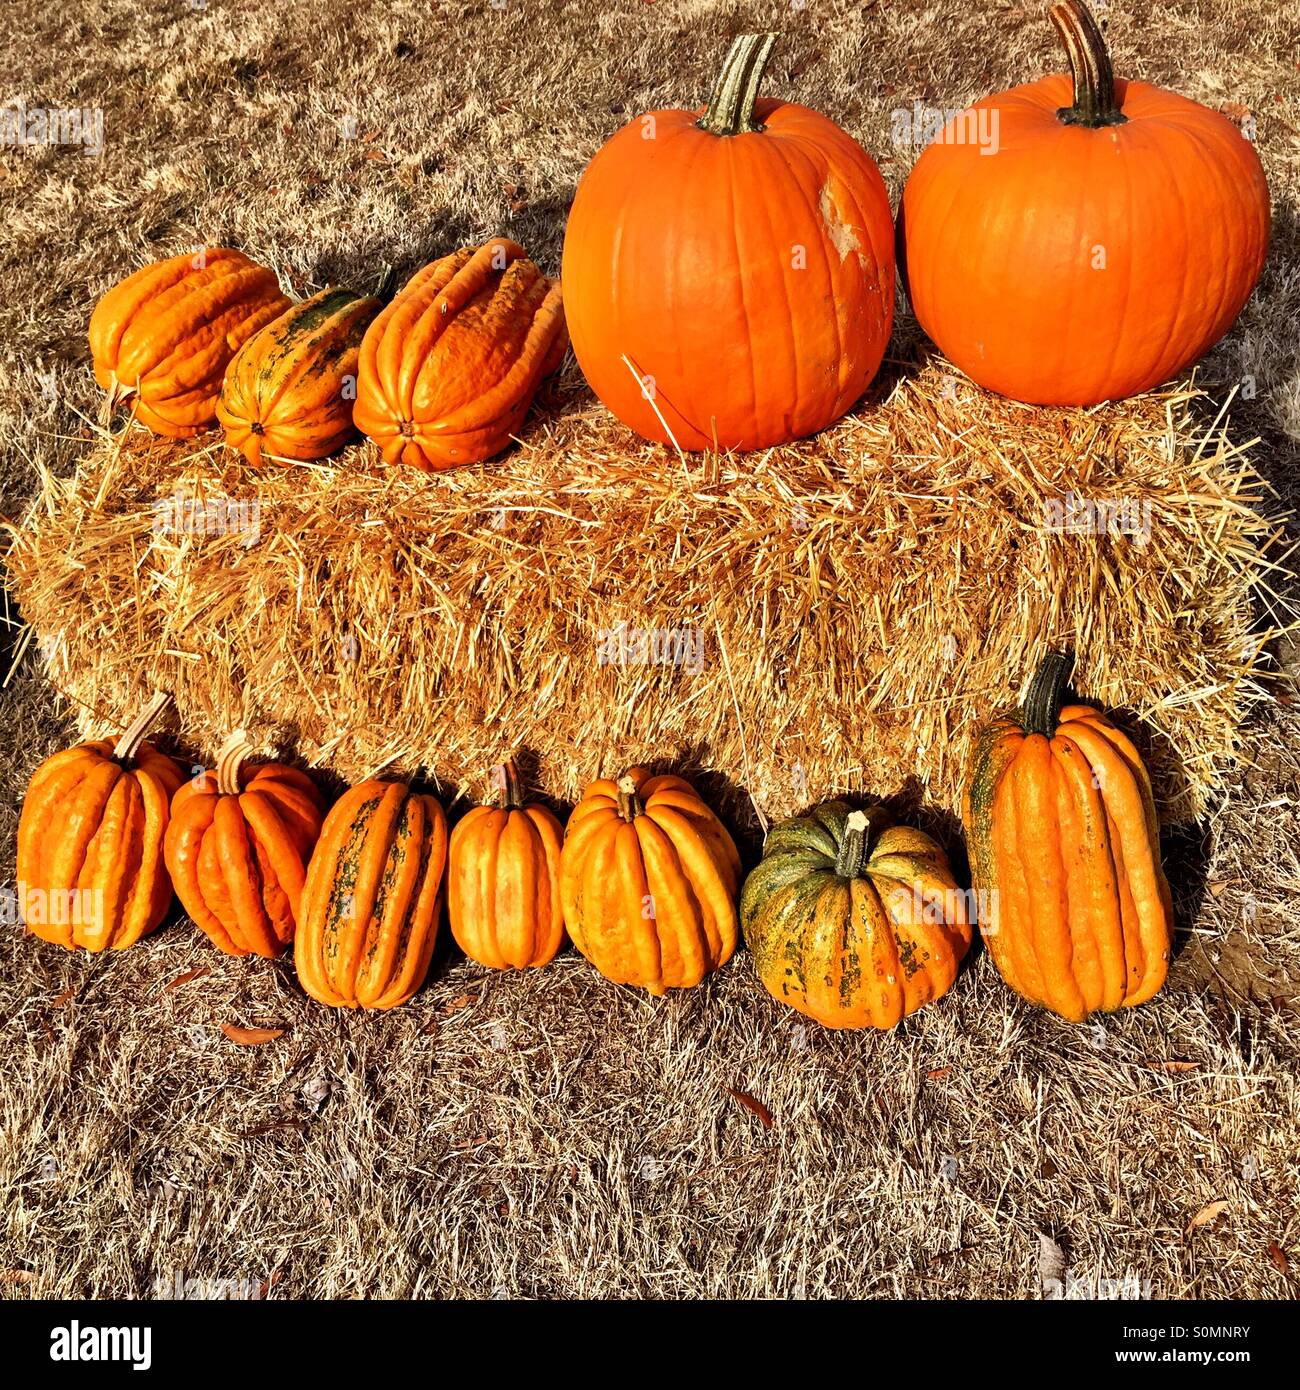 Decorative pumpkins and squashes adorning a bale of hay in the Autumn sunlight Stock Photo